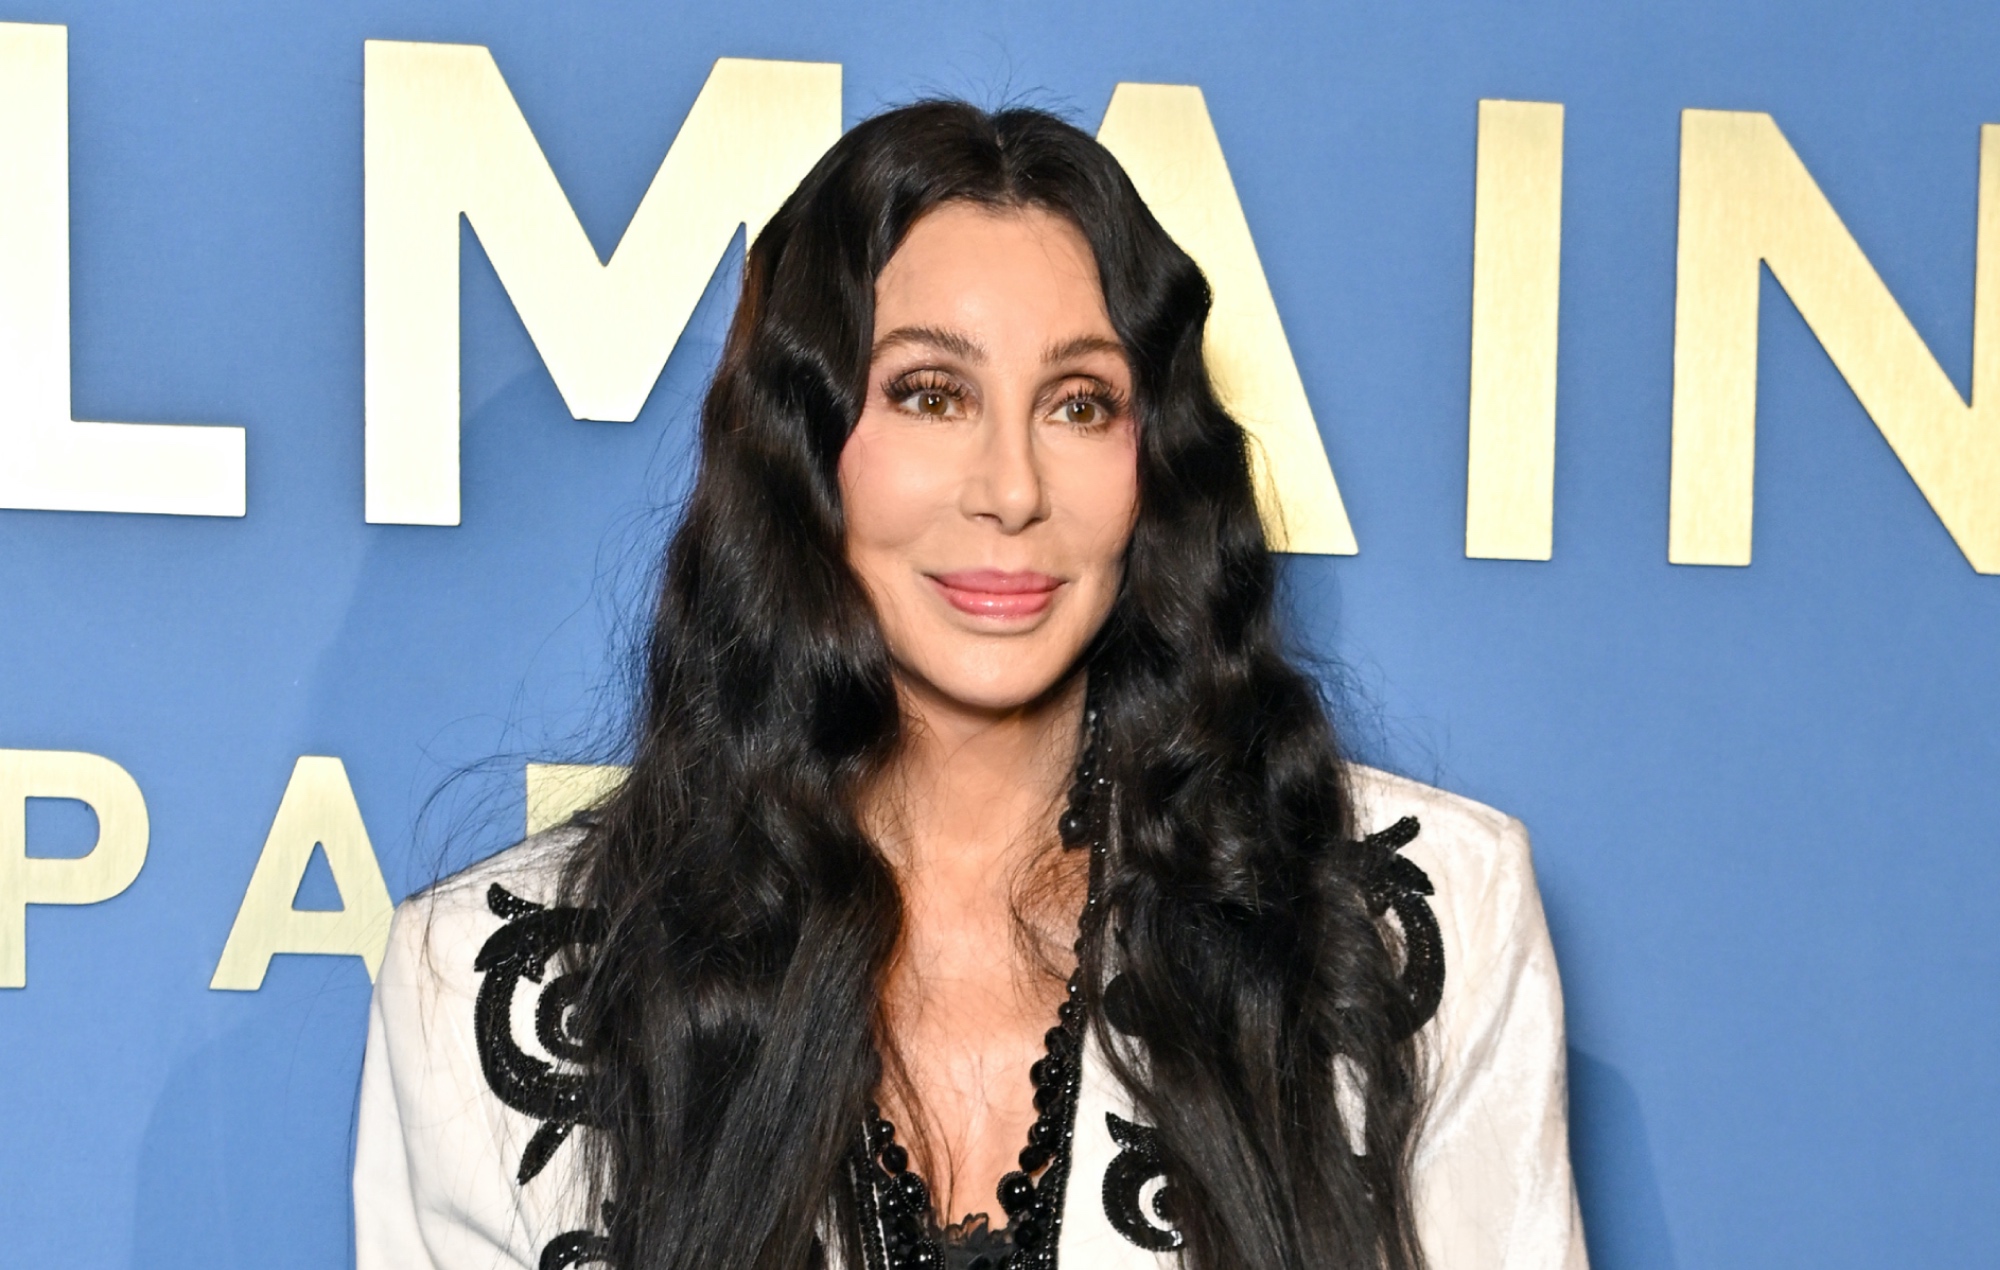 Cher says she’s “never liked” her singing voice “that much”